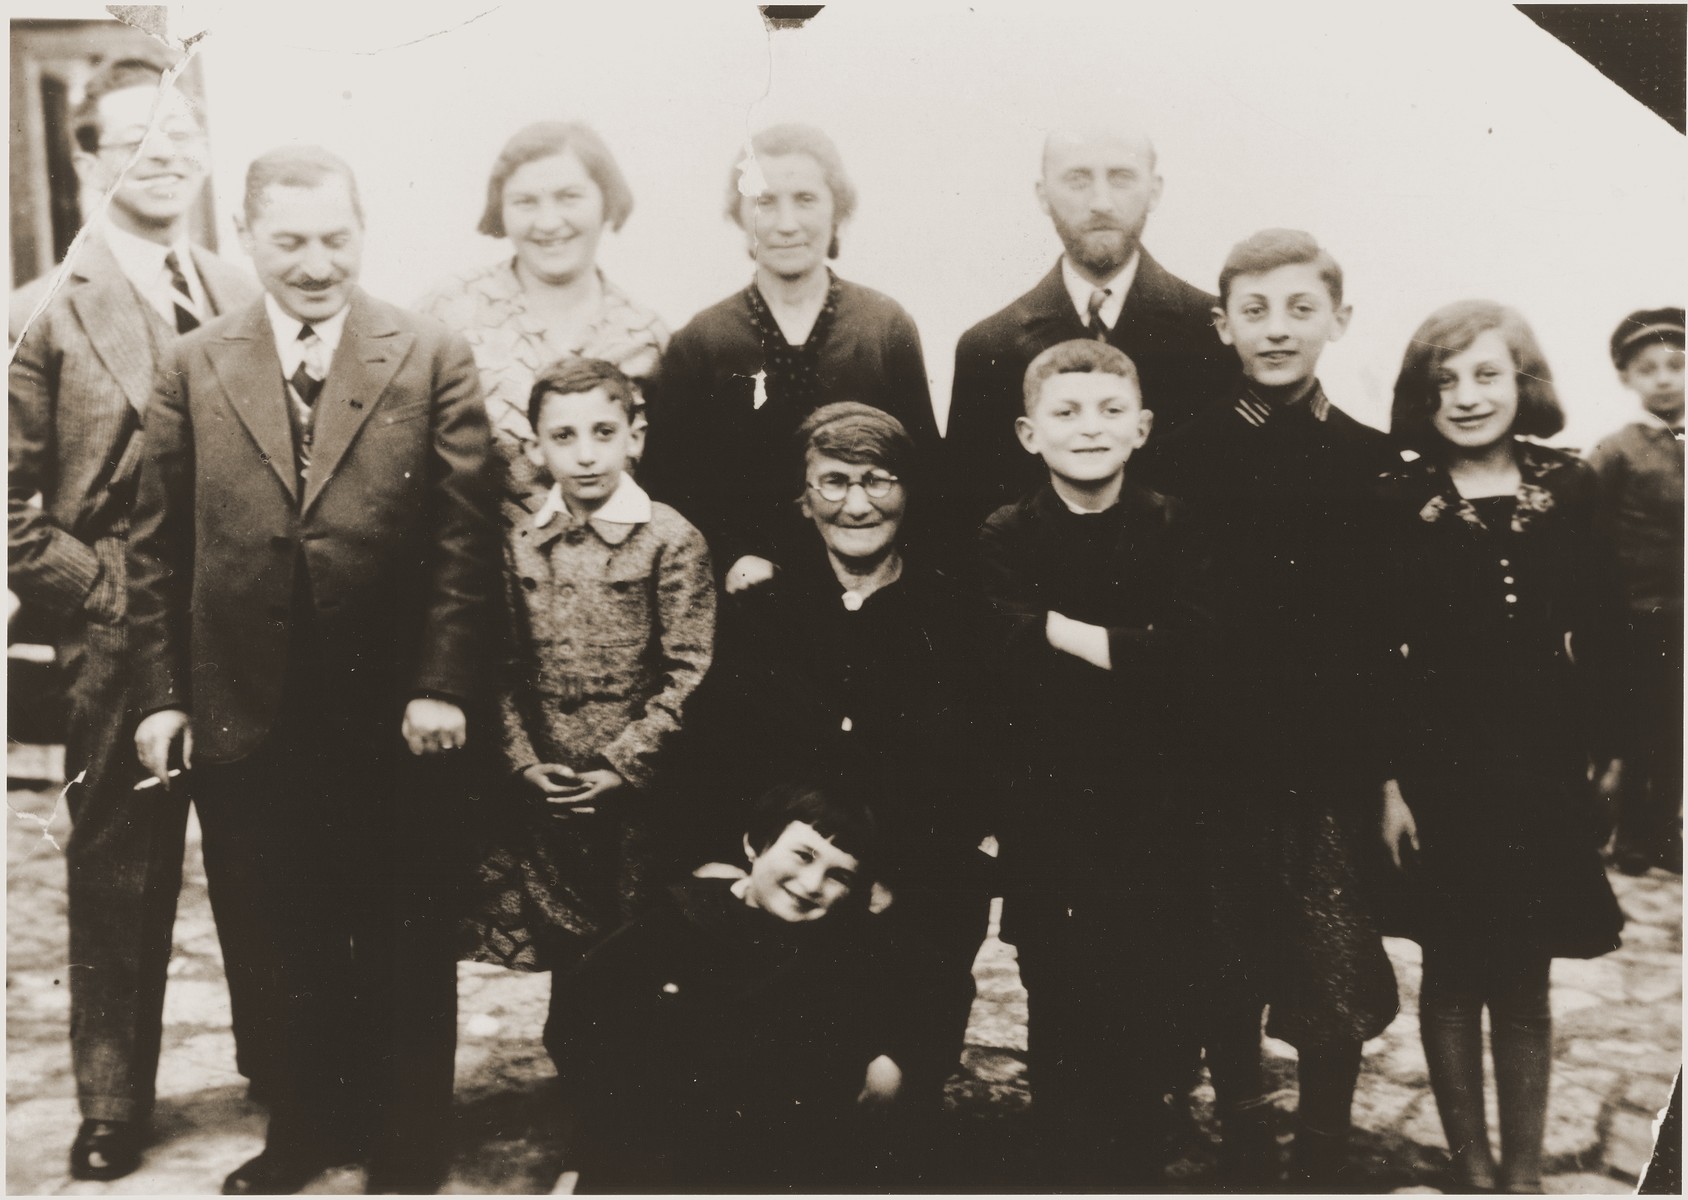 Group portrait of the extended Jewish Hochberg family in Brody, Poland. 

Pictured in the back from left to right, are: Marco Chaim Lifschitz-Hochberg (the donor's uncle); Bernard Hochberg (the donor's father); Dina (Harmelin) Hochberg (the donor's mother); Malka (Hochberg) Katz (the donor's aunt); and Efraim Katz (the donor's uncle). In the middle from left to right, are: Abraham Katz (the donor's cousin); Batja (Lifschitz) Hochberg (the donor's grandmother); Sigmund Hochberg (the donor's brother); Itamar and Rachel Katz. In front is the donor, Eugenia Hochberg.